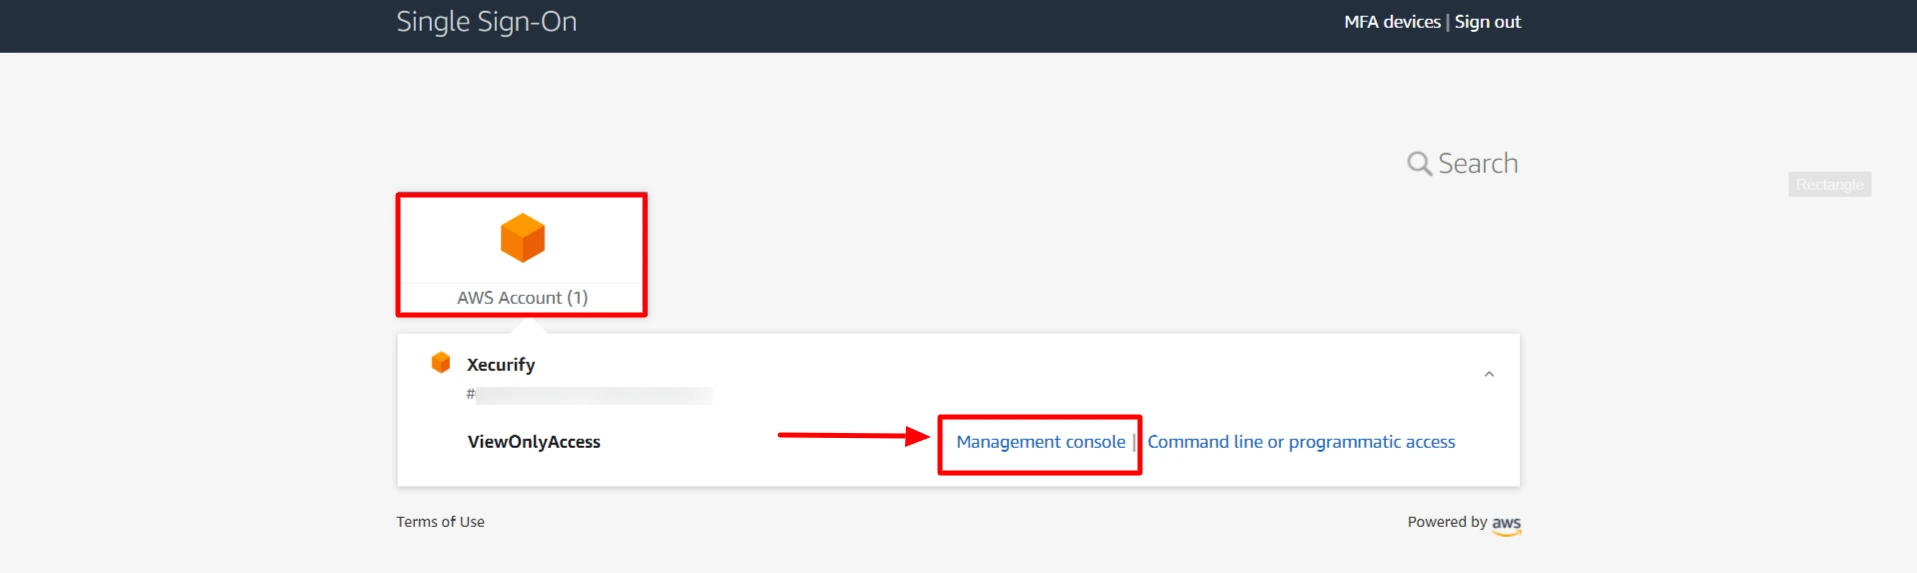 AWS Single Sign-On (SSO) management console